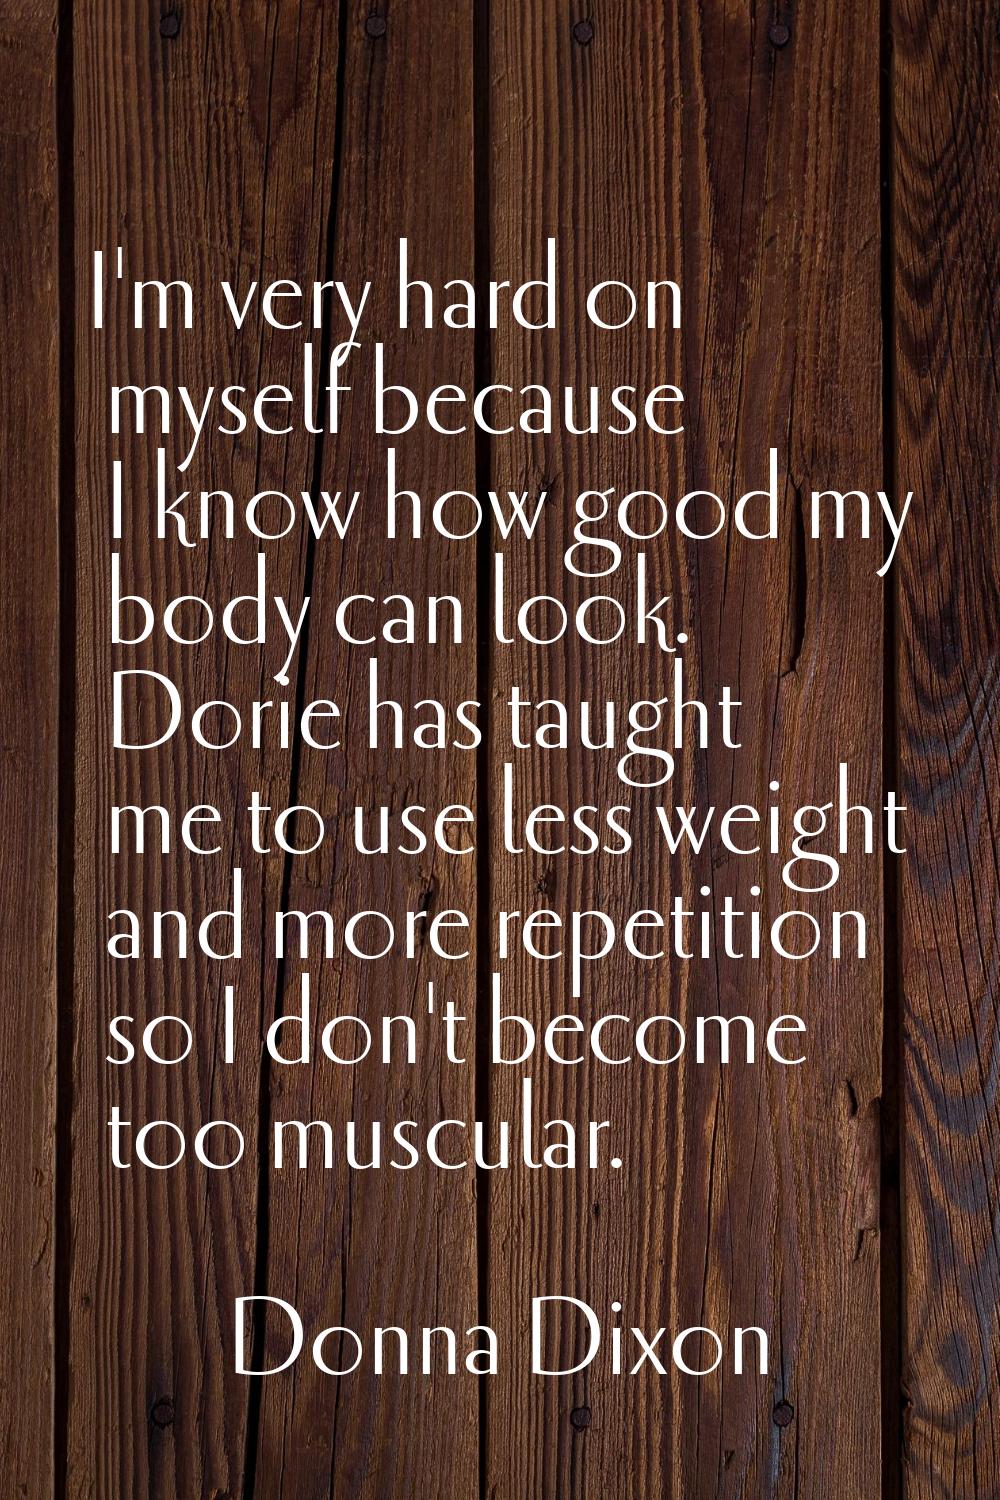 I'm very hard on myself because I know how good my body can look. Dorie has taught me to use less w